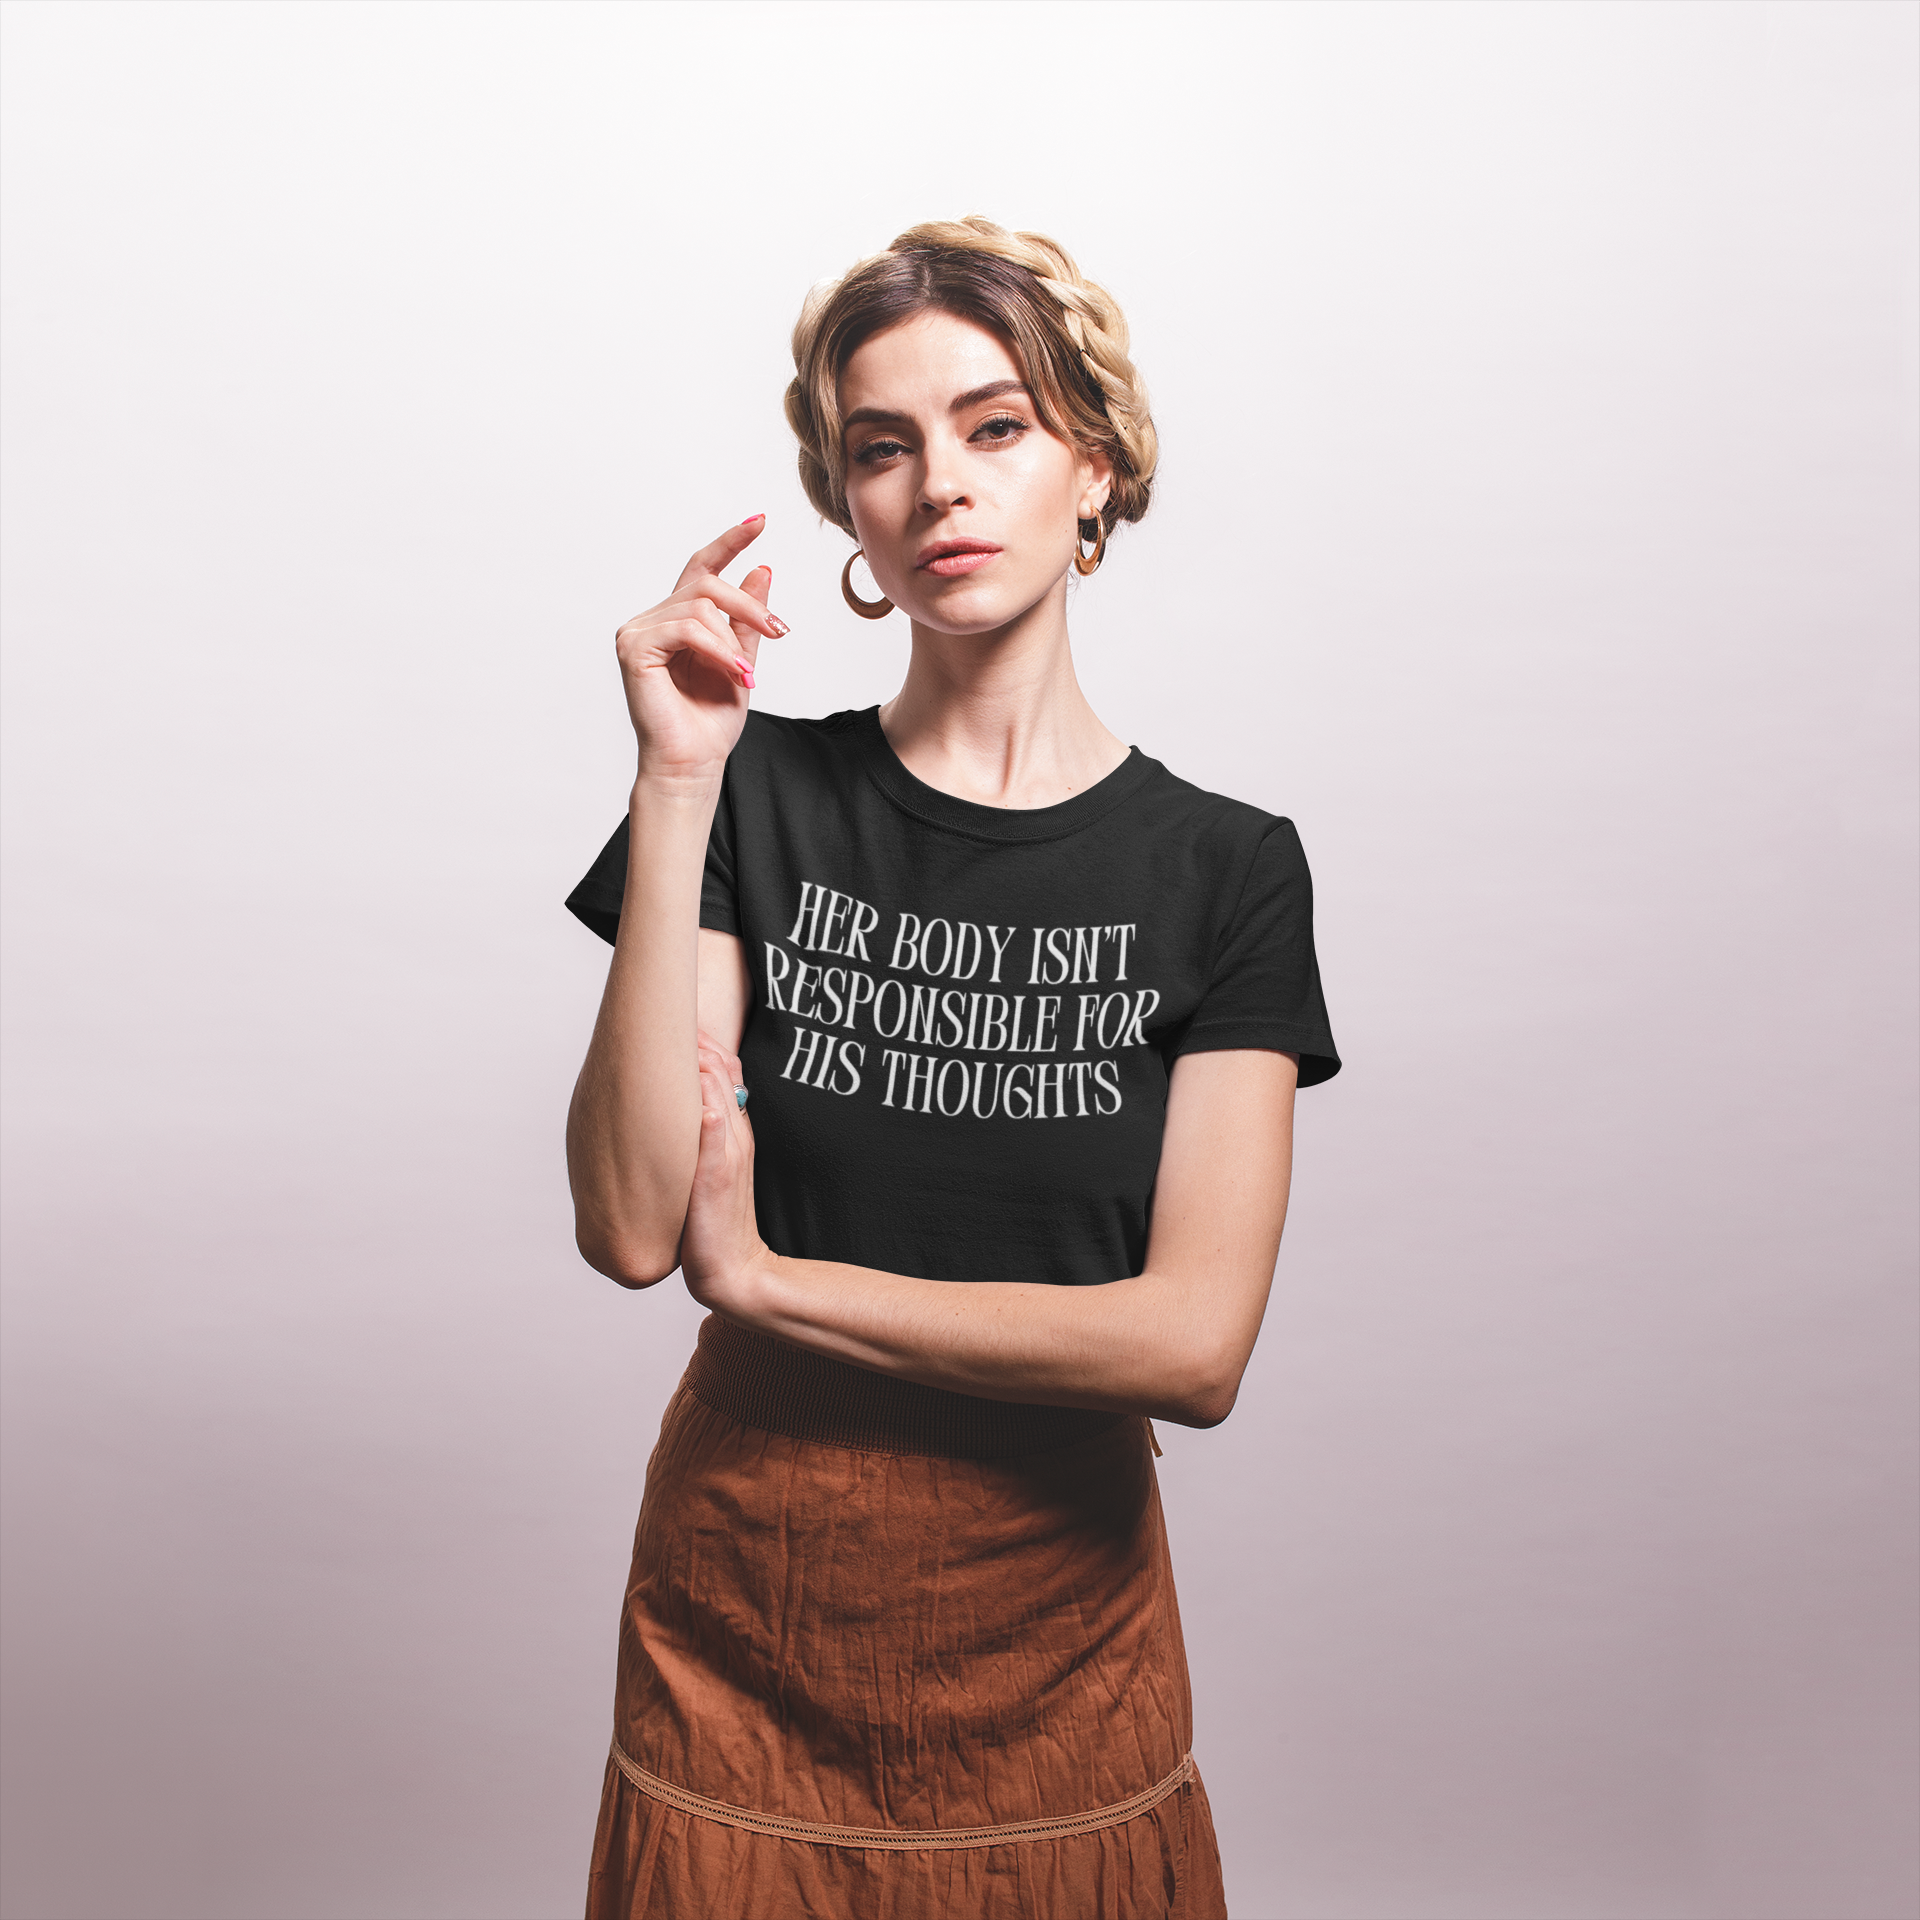 Her Body Isn’t Responsible For His Thoughts Unisex Feminist t-shirt - Shop Women’s Rights T-shirts - Feminist Trash Store - Black Oversized Women’s T-shirts